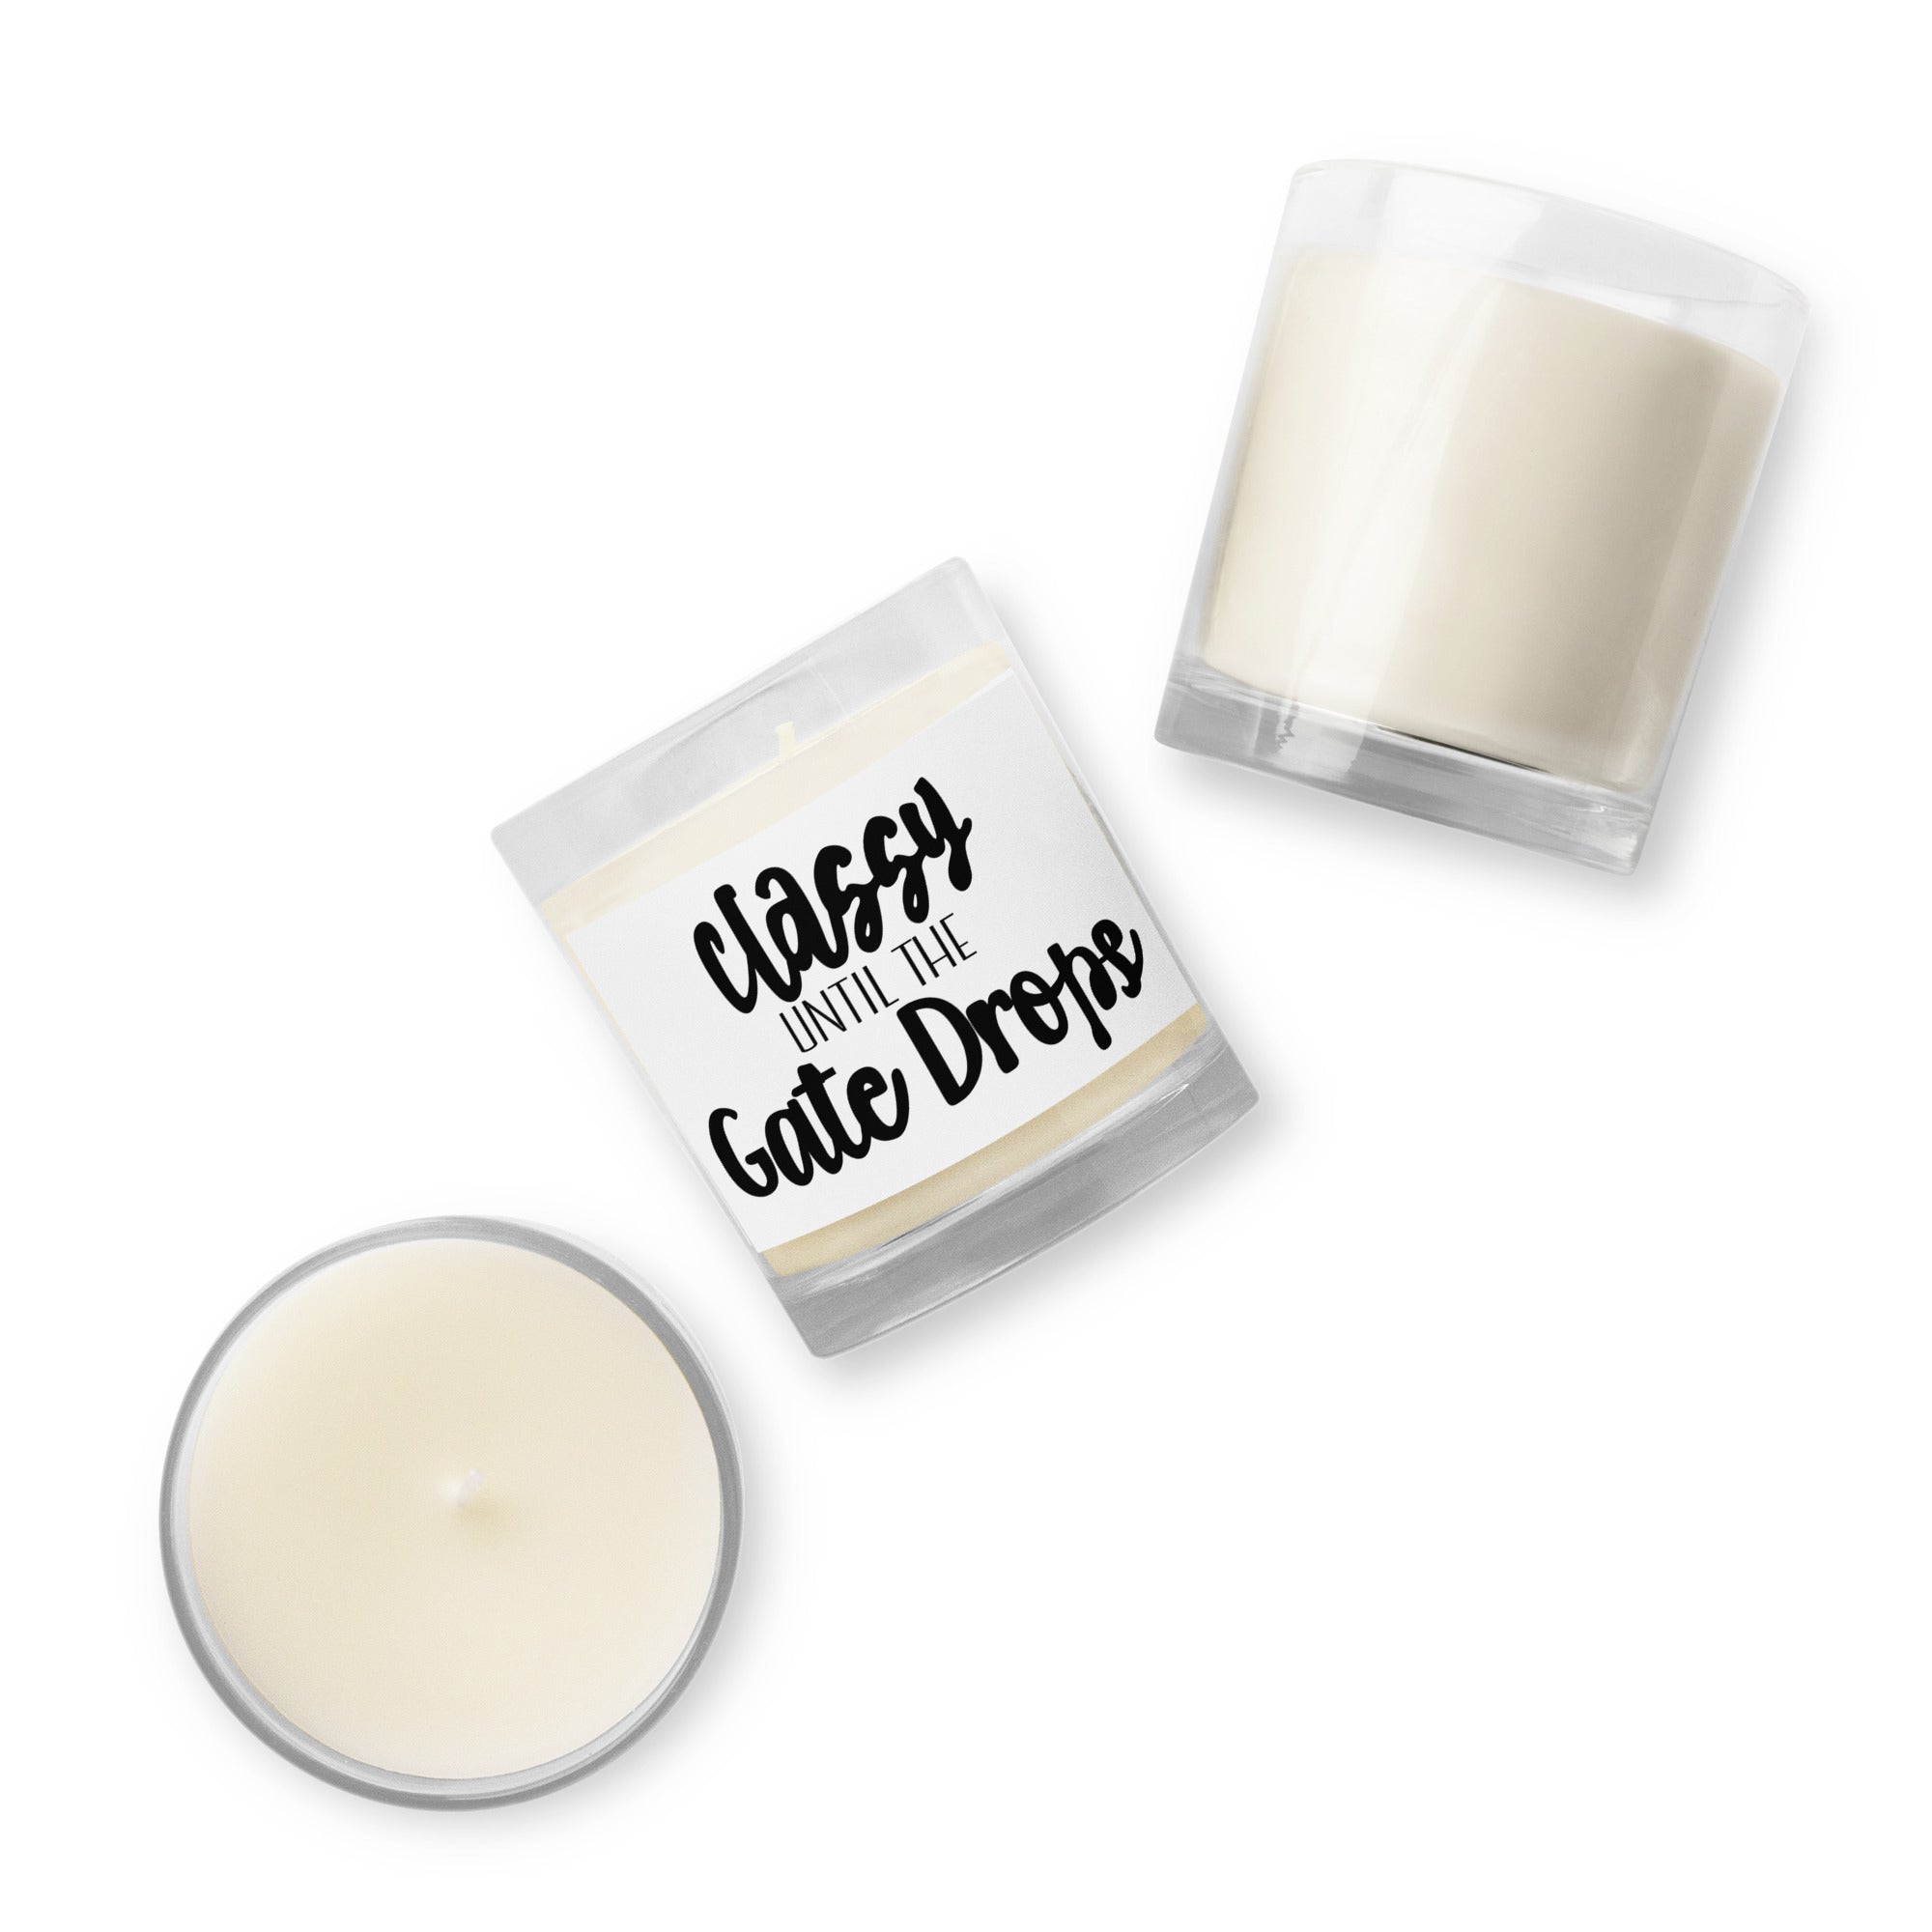 Classy Until The Gate Drops soy wax candle